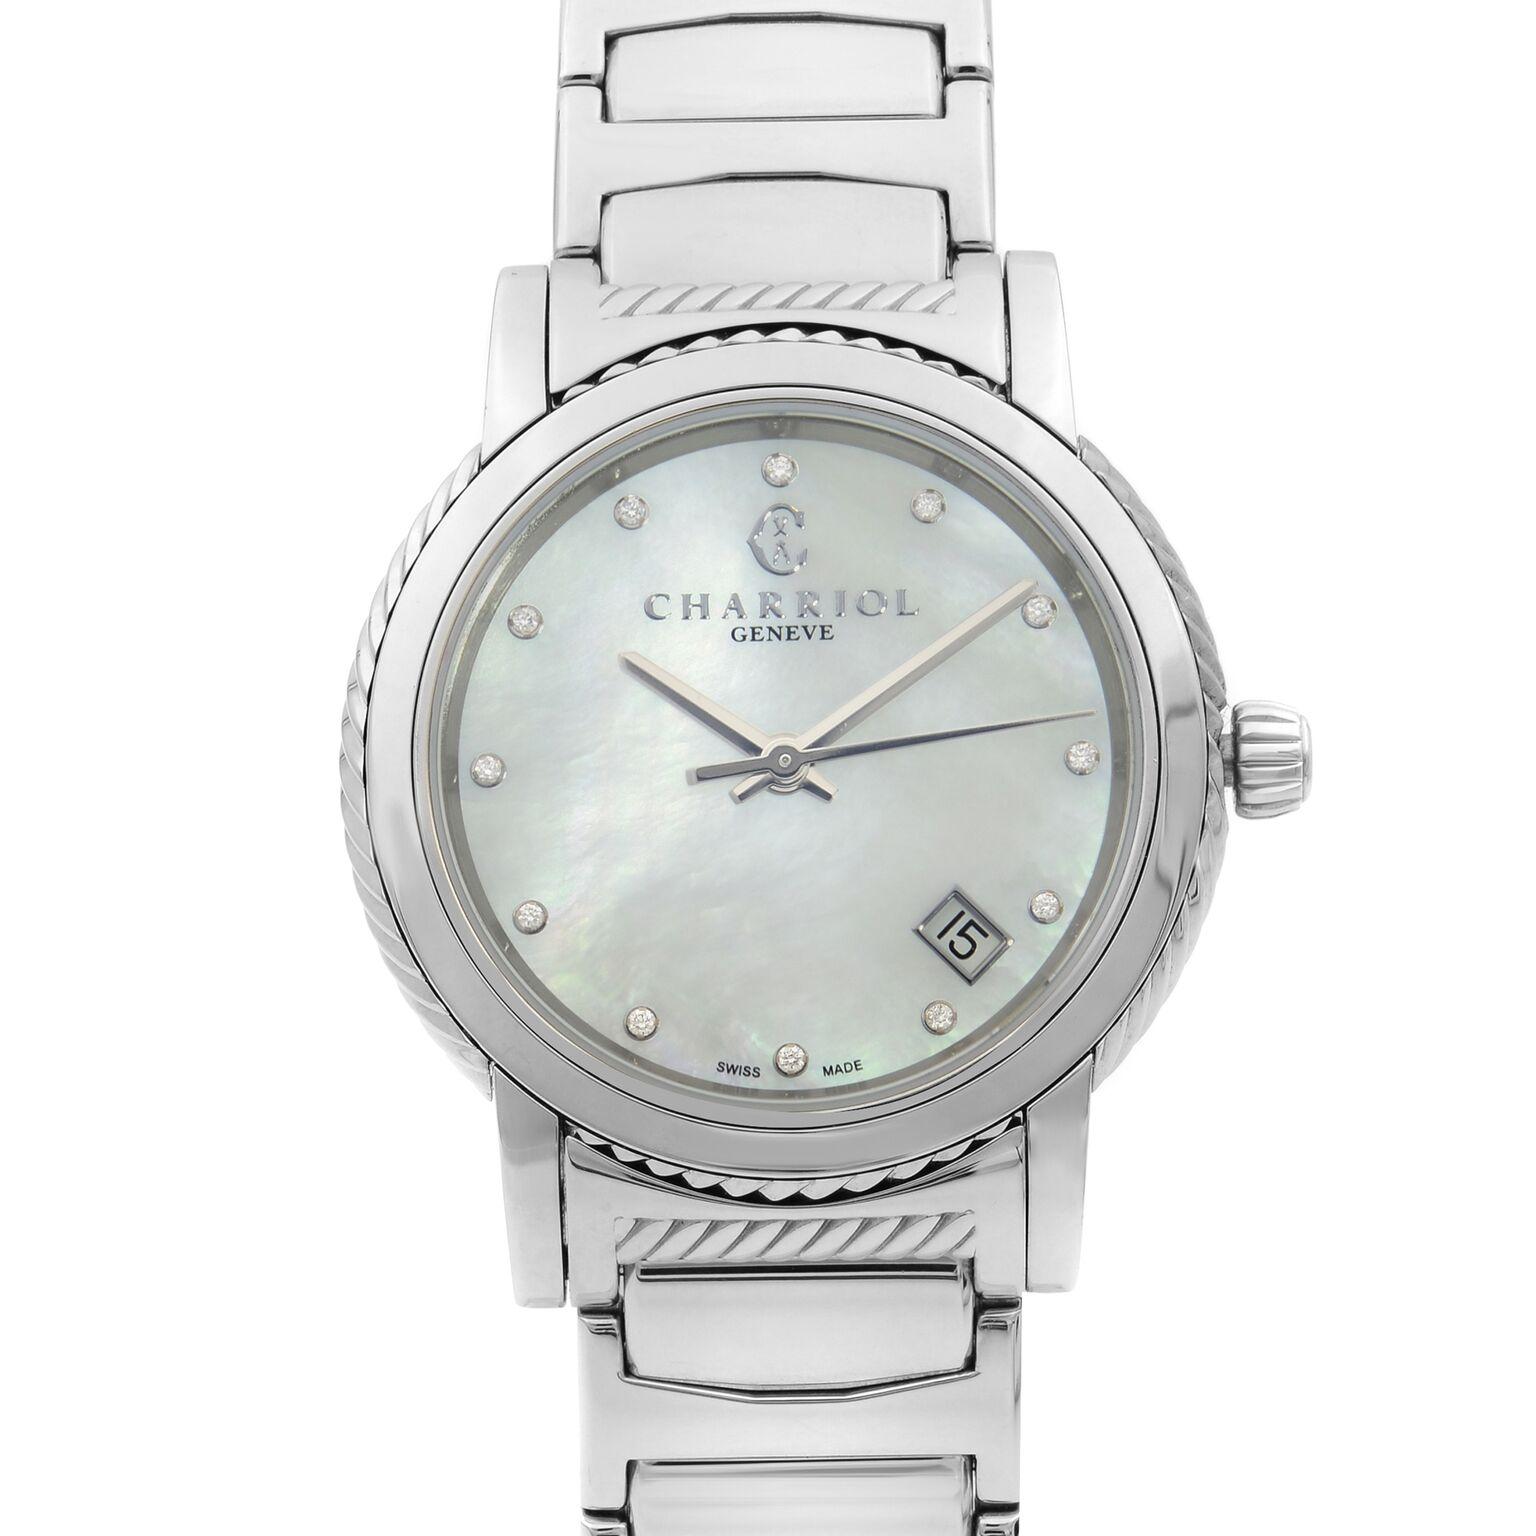 This New Without Tags Charriol Parsii P33S2.920.001 is a beautiful Ladie's timepiece that is powered by quartz (battery) movement which is cased in a stainless steel case. It has a round shape face, date indicator dial, and has hand diamonds style